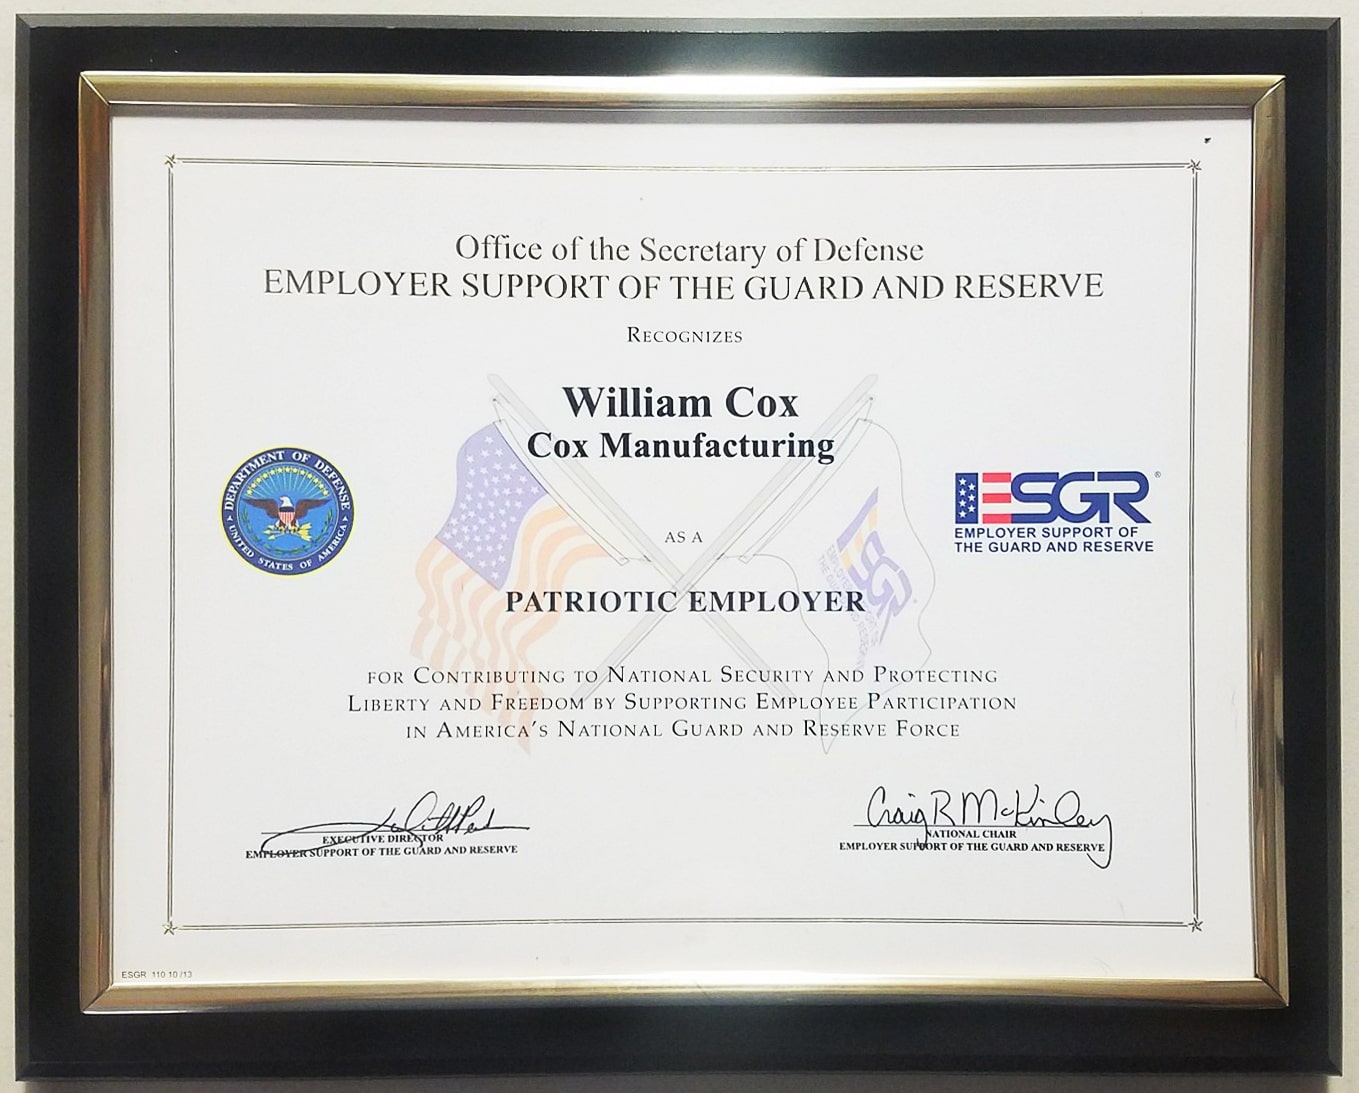 Office of the Secretary of Defense Employer Support of the Guard and Reserve recognizes William Cox as a Patriotic Employer.